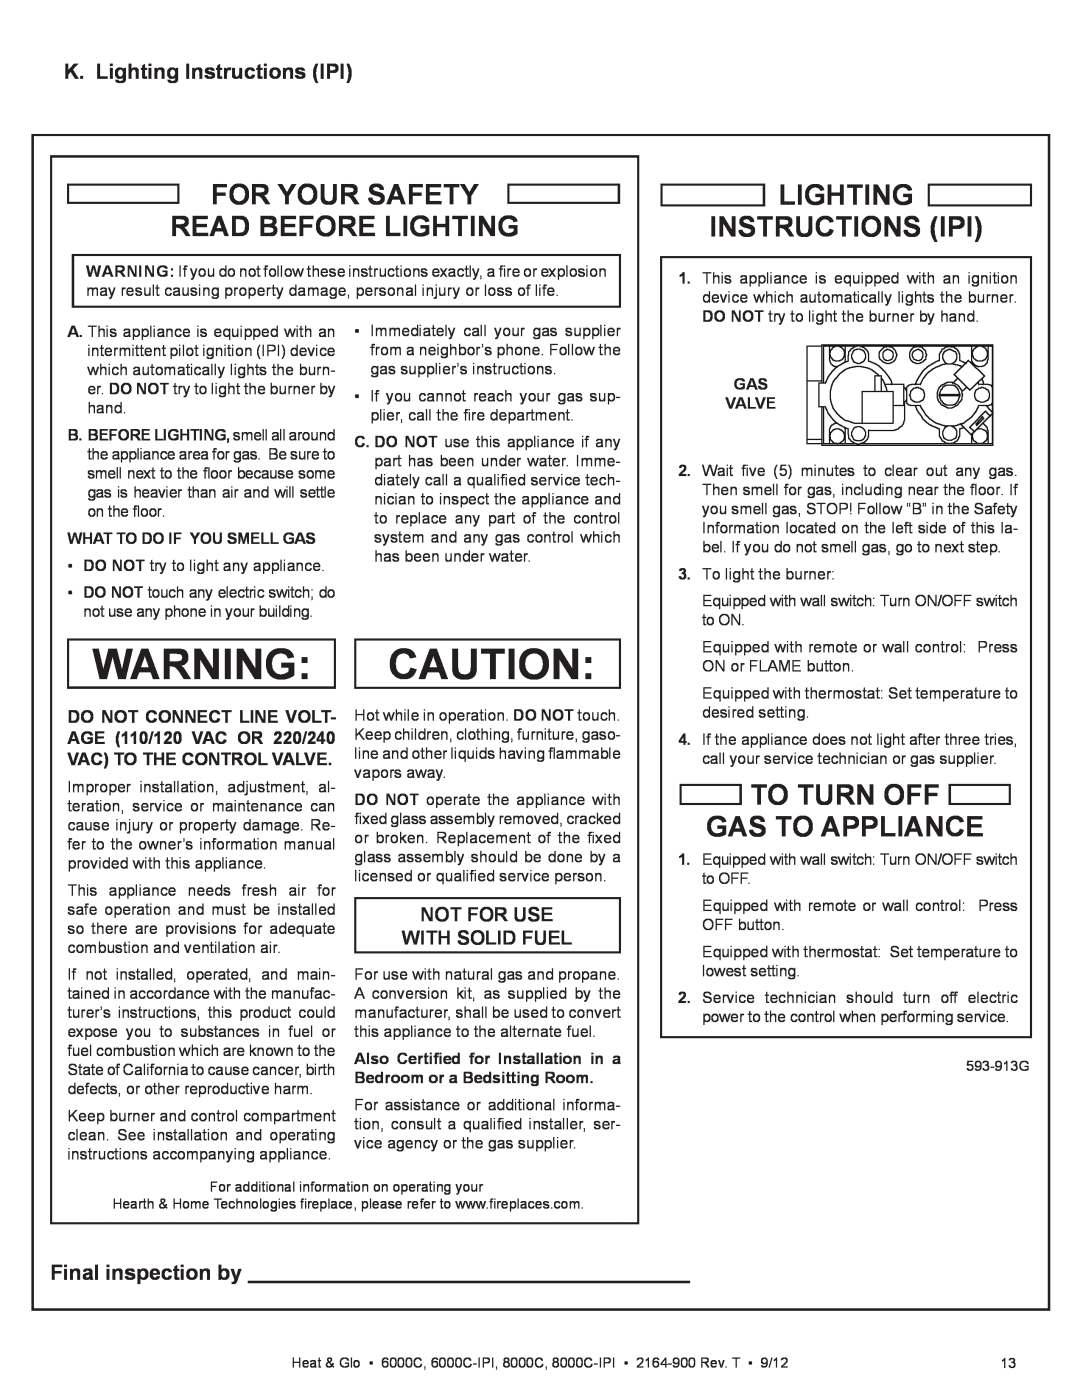 Heat & Glo LifeStyle 6000C For Your Safety Read Before Lighting, Lighting Instructions Ipi, To Turn Off Gas To Appliance 